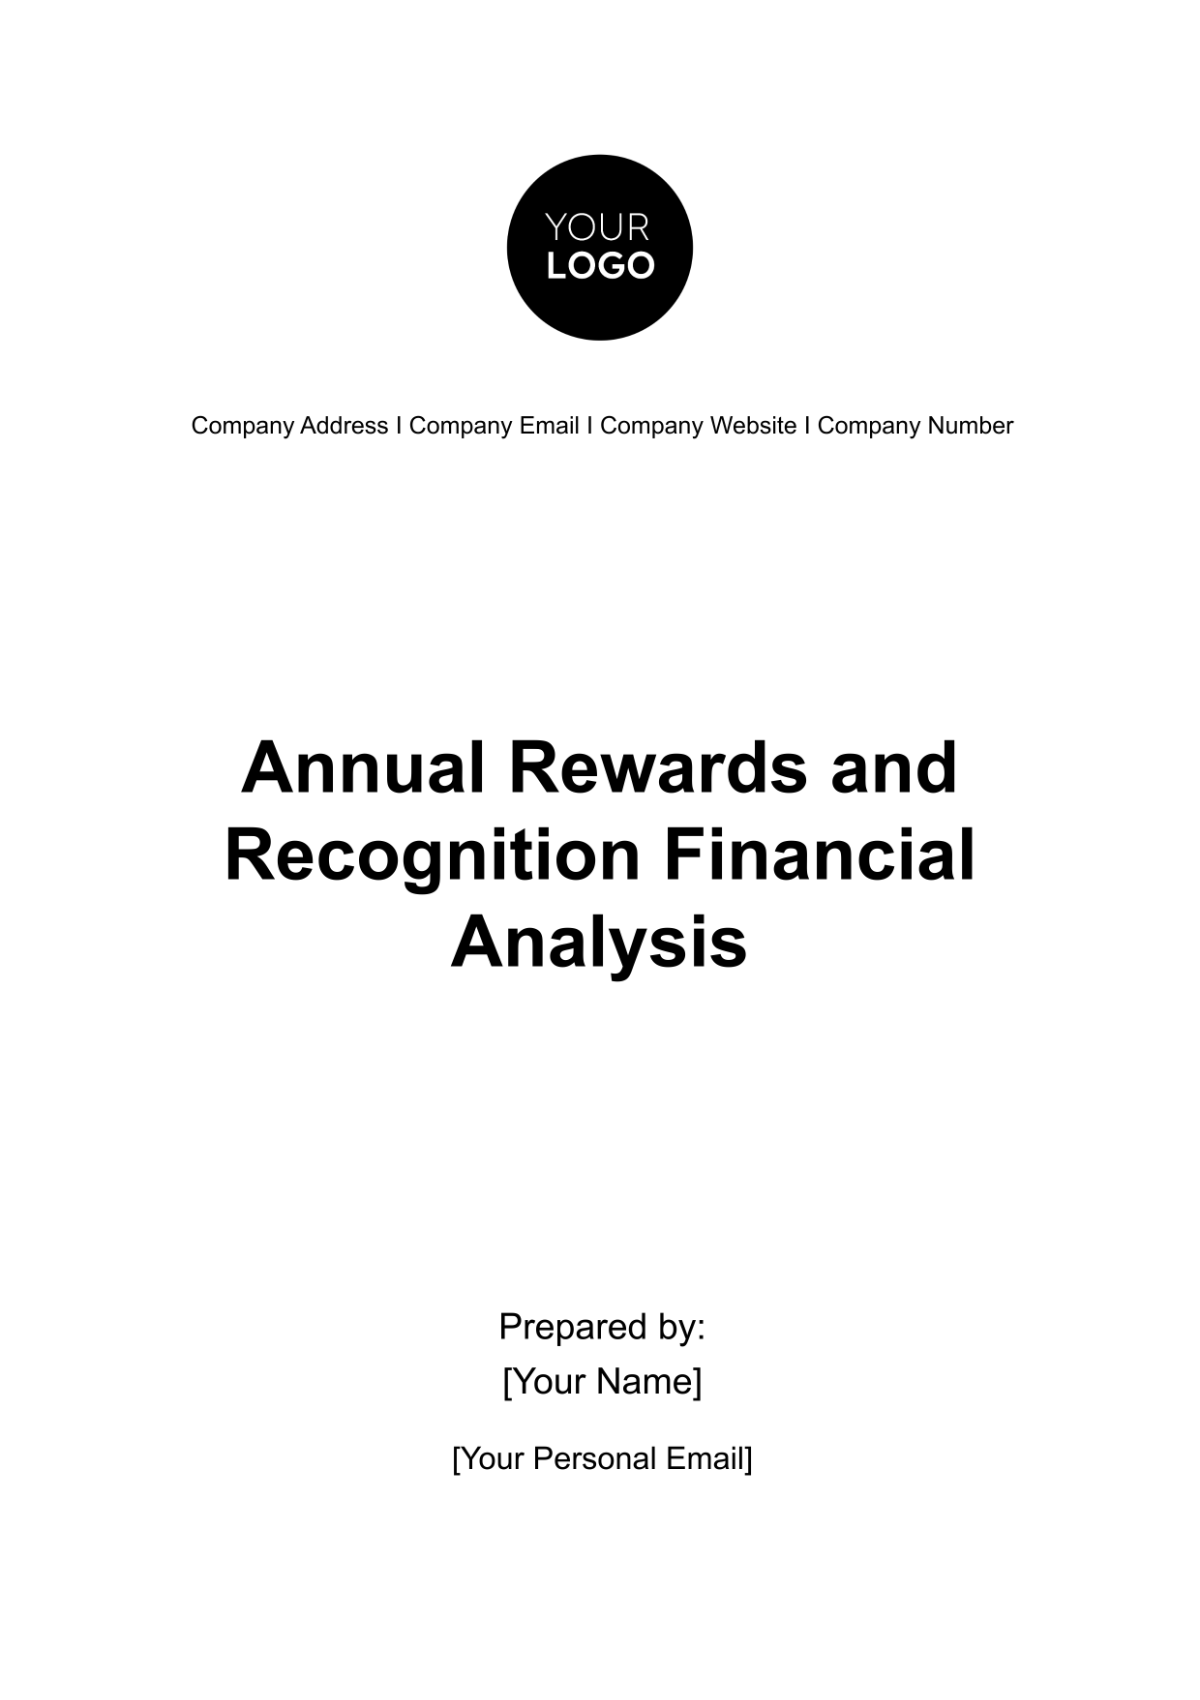 Free Annual Rewards and Recognition Financial Analysis HR Template